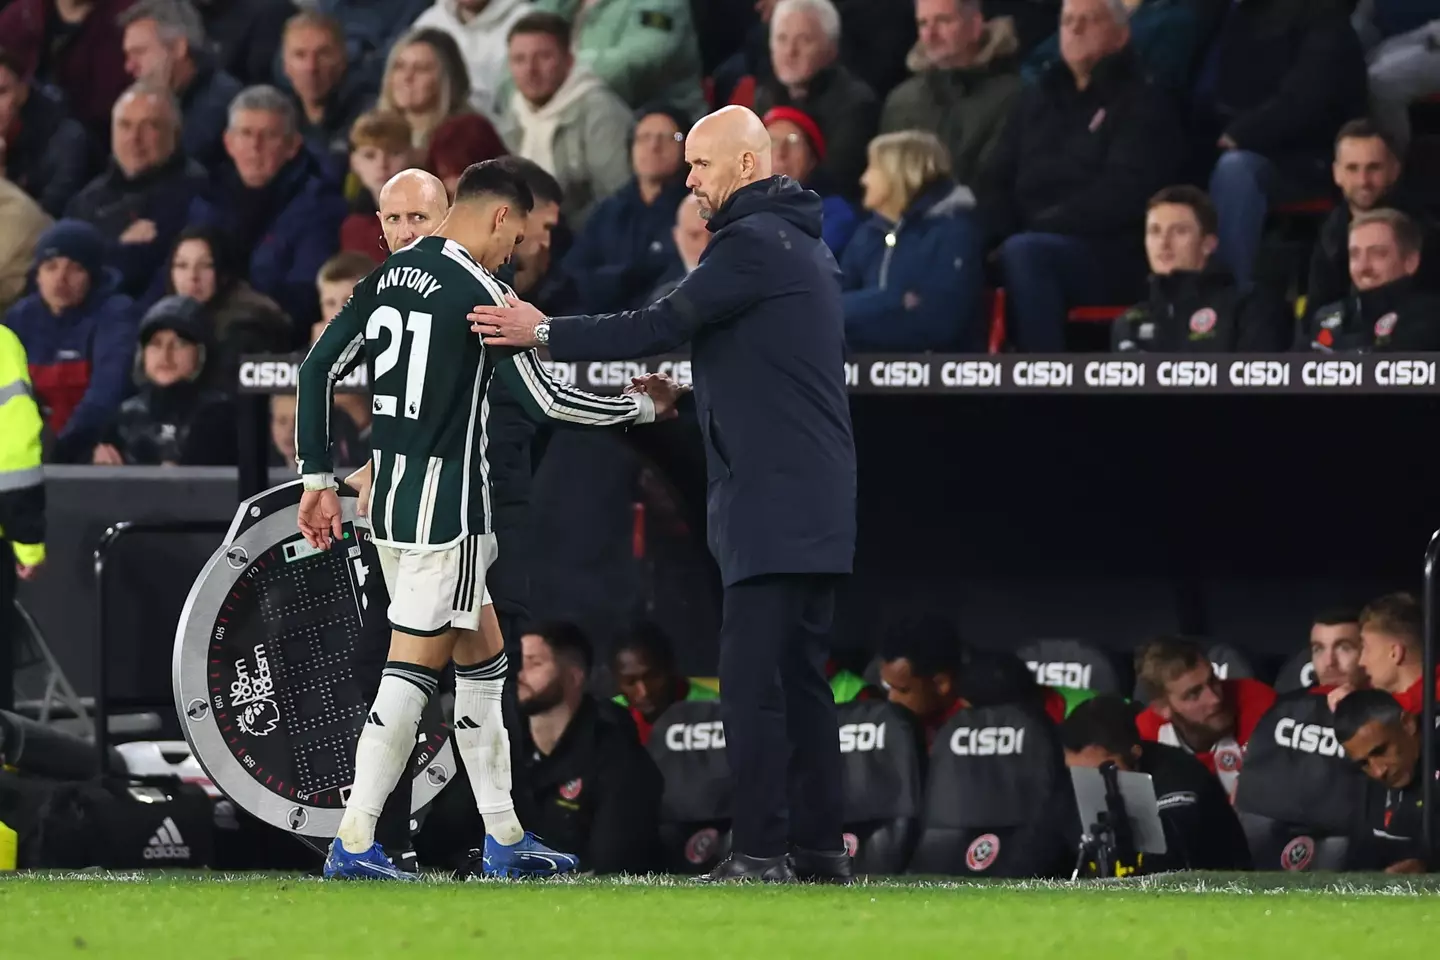 Ten Hag consoles Antony as he leaves the pitch against Sheffield United last month. (Image